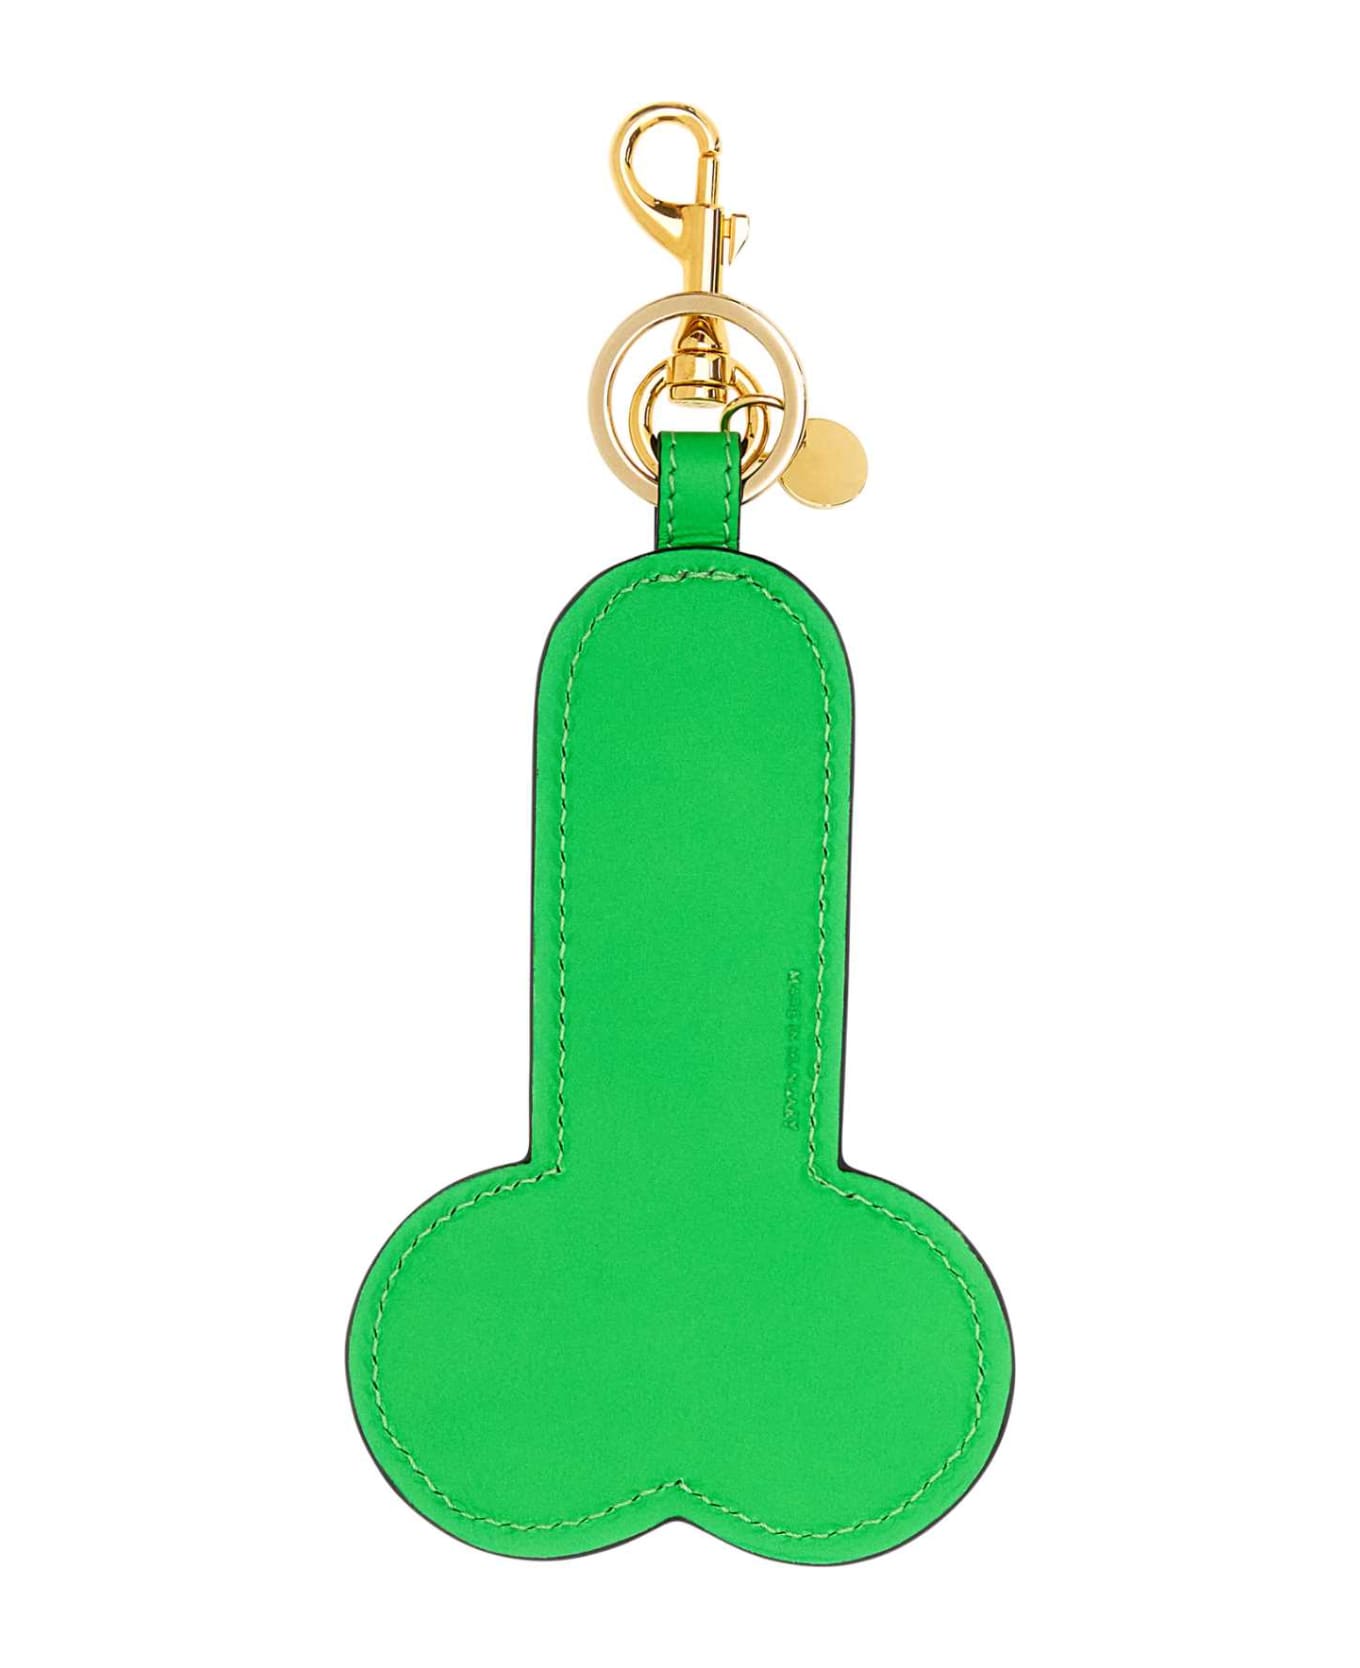 J.W. Anderson Fluo Green Leather Key Ring - NEONGREEN キーリング